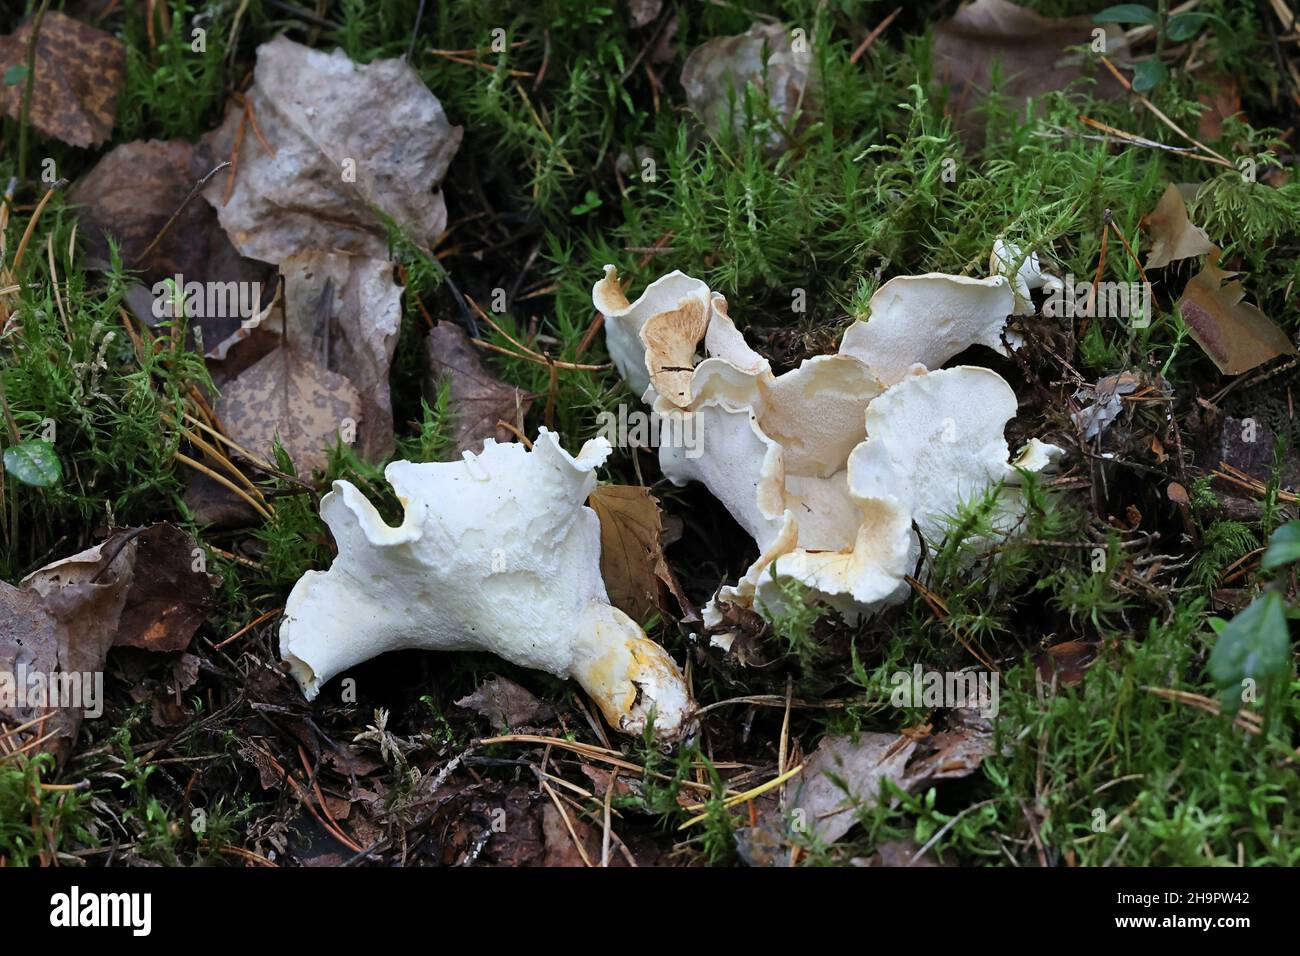 Albatrellus ovinus, known as Sheep Polypore or Forest Lamb Mushroom, wild edible fungus from Finland Stock Photo